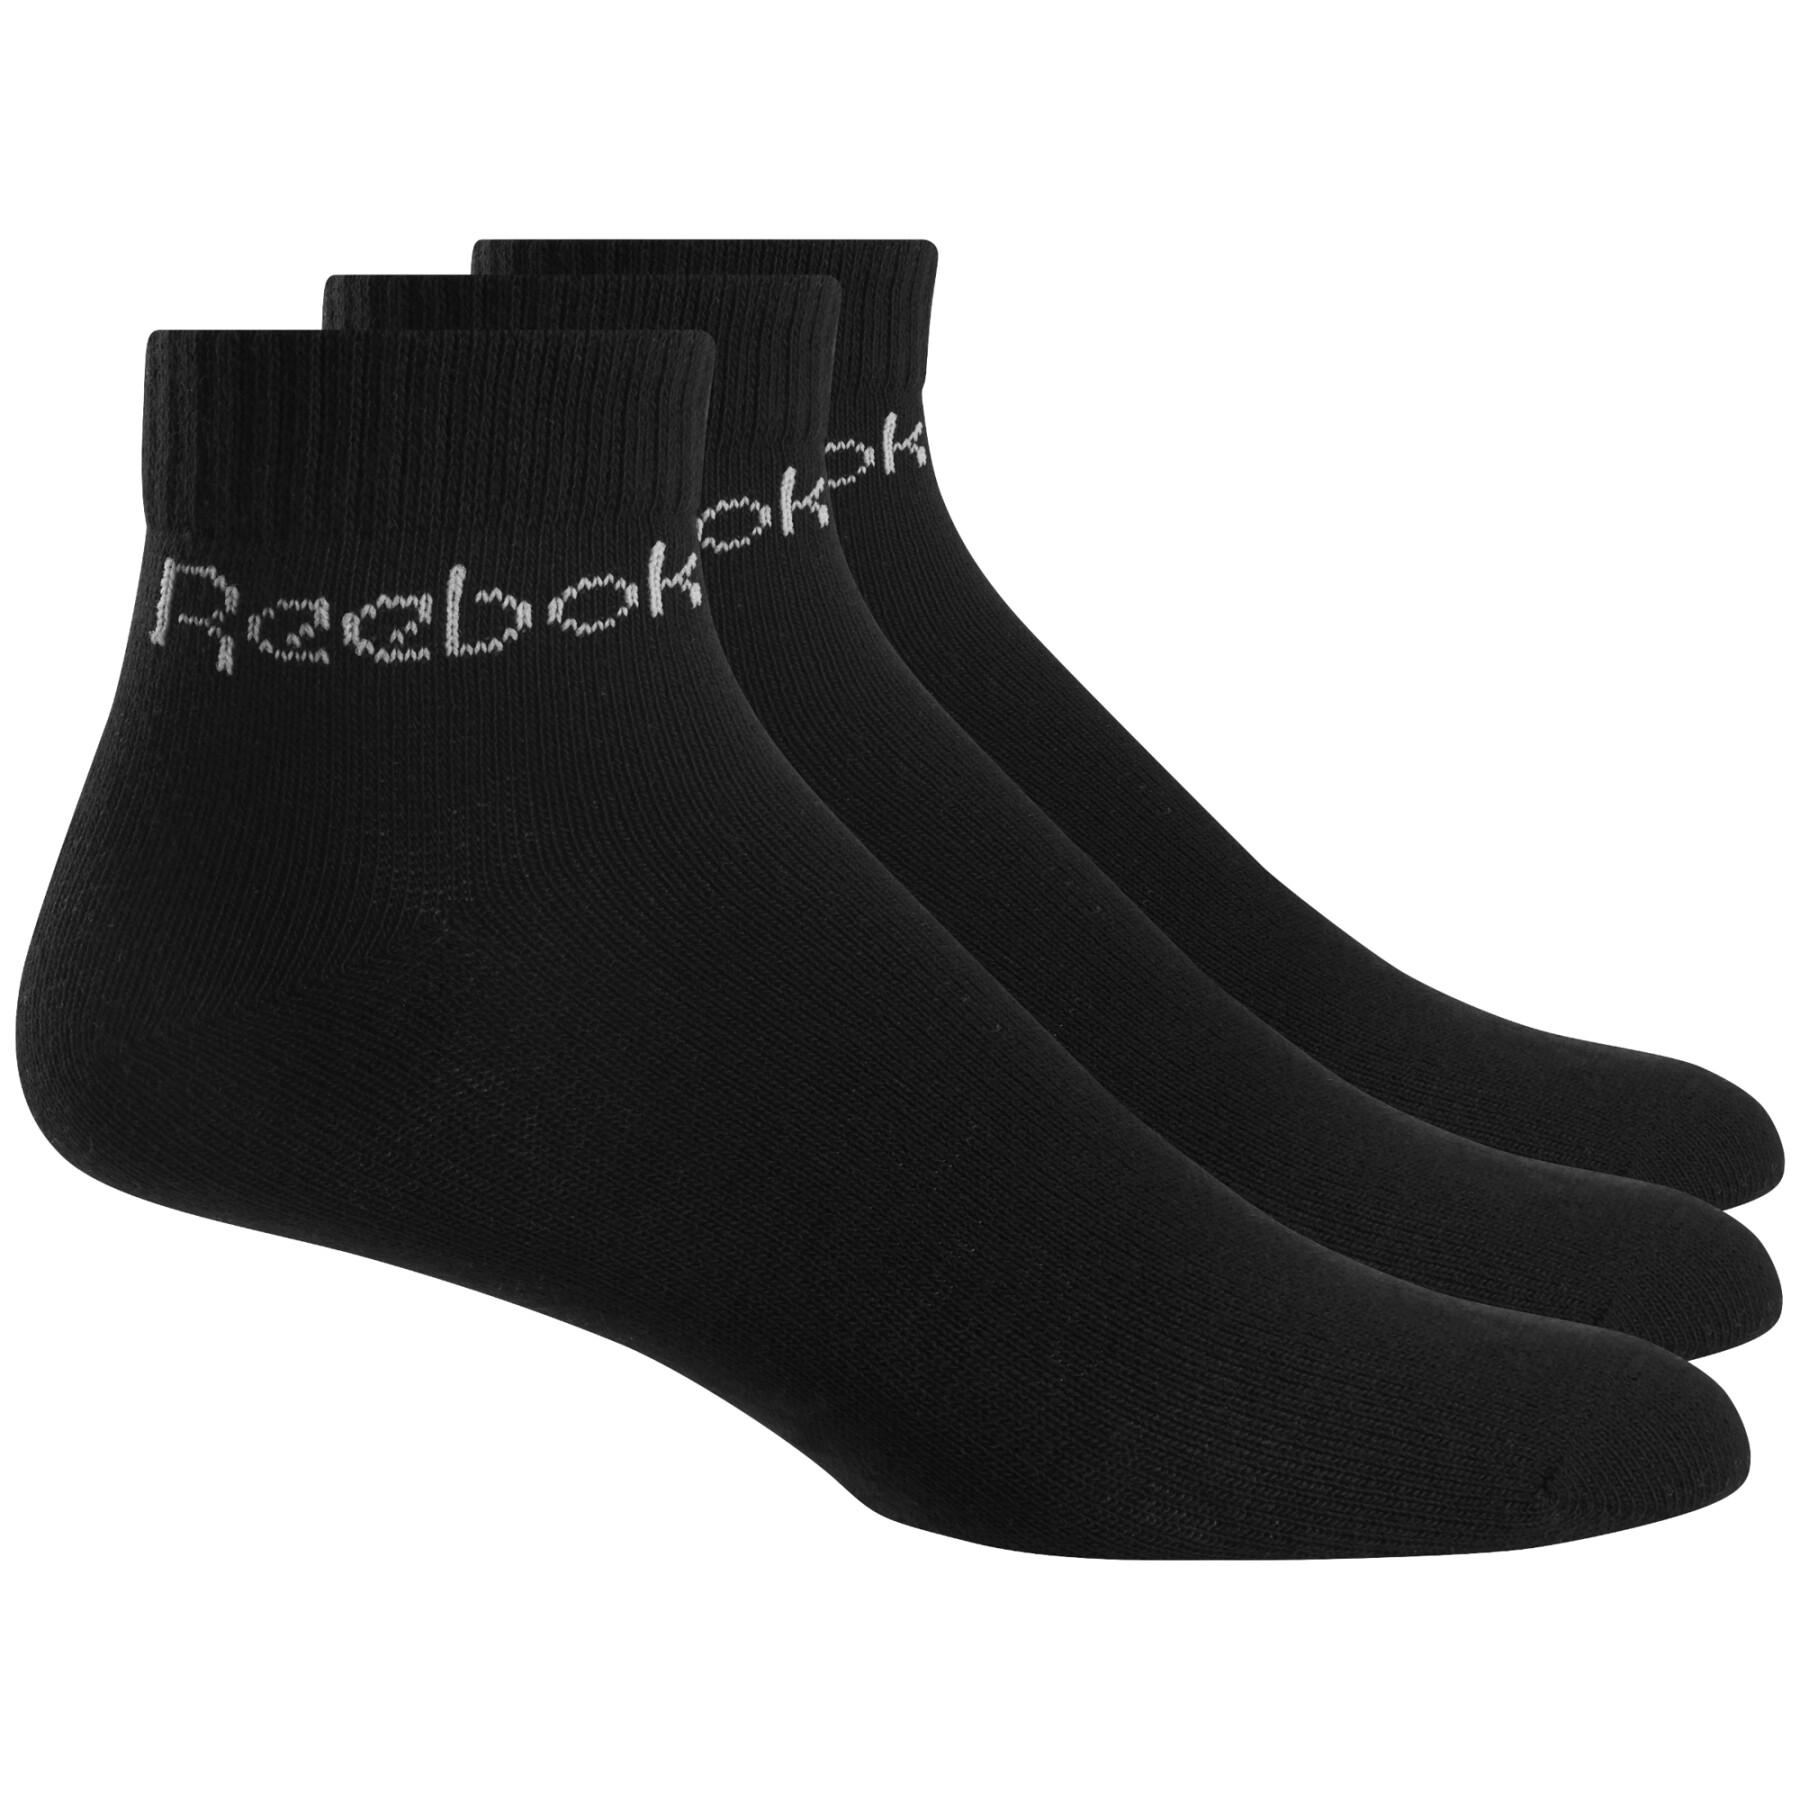 Calze basse Reebok Active Core Ankle (x3)